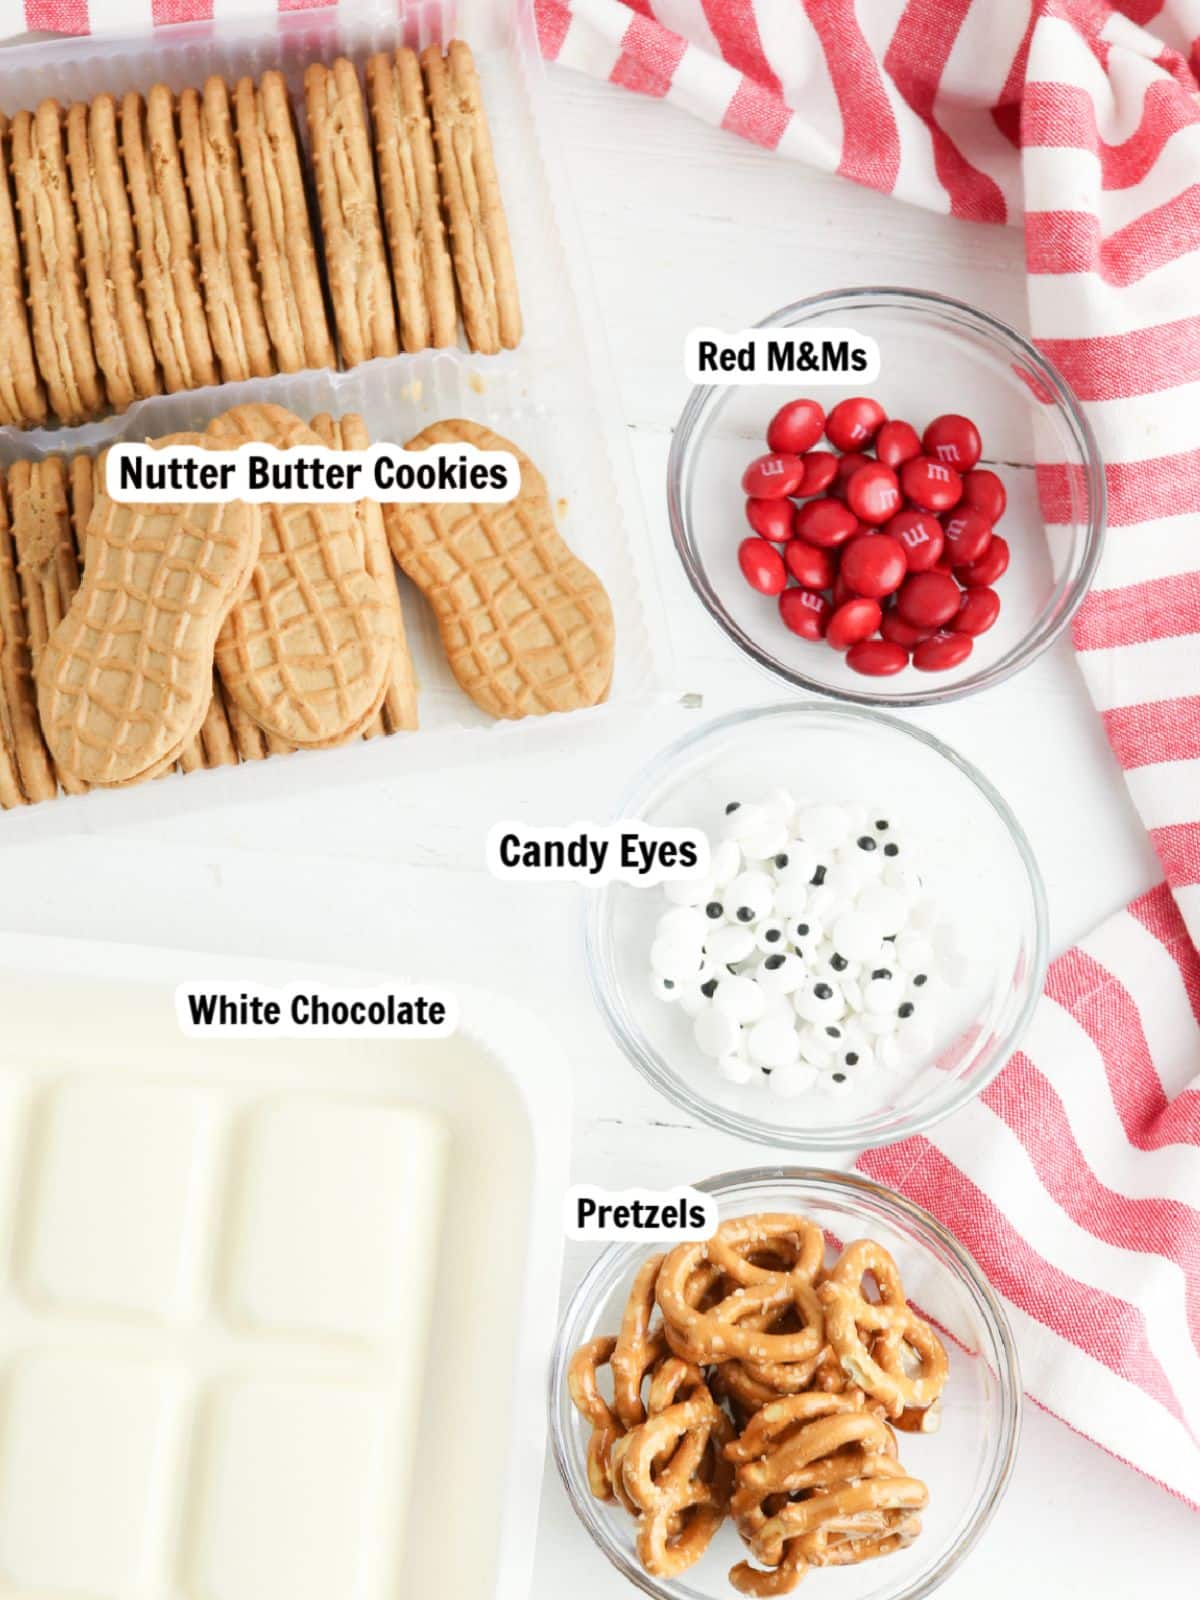 Ingredients, pretzels, white chocolate, candy eyes, candy pieces, nutter butter cookies.